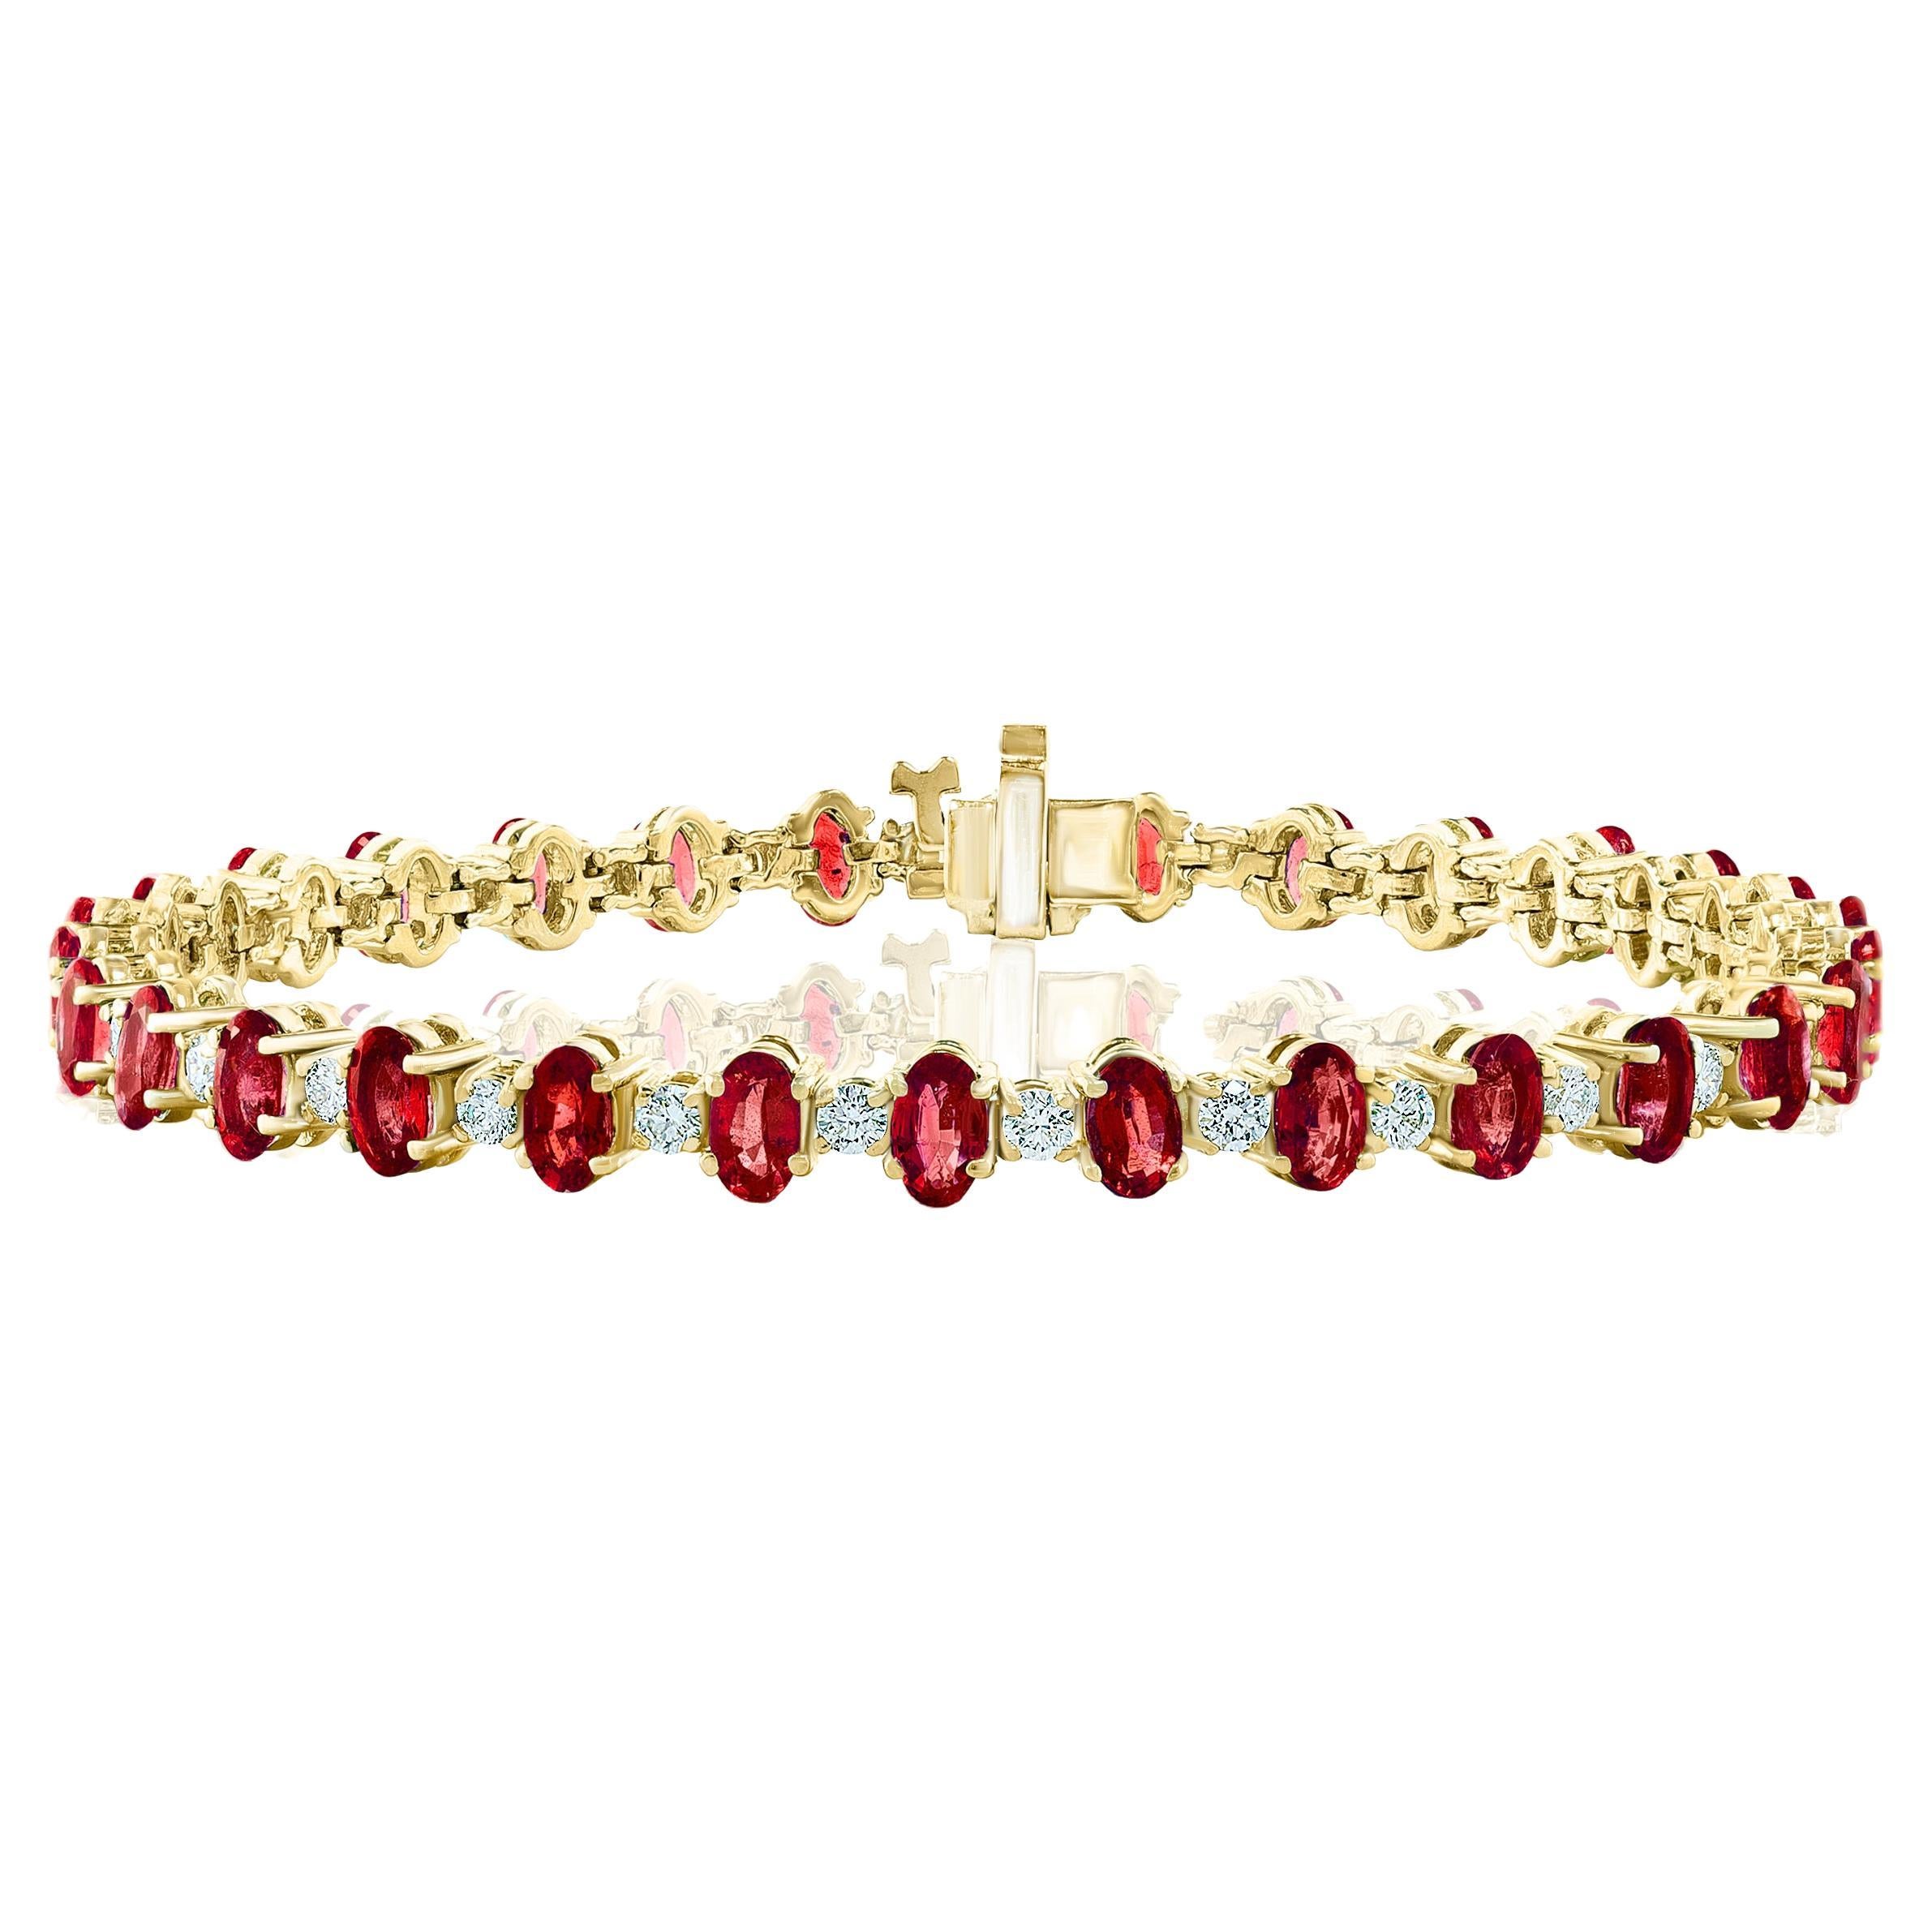 Grandeur 9.27 Carats Oval Cut Ruby and Diamond Bracelet in 14k Yellow Gold For Sale